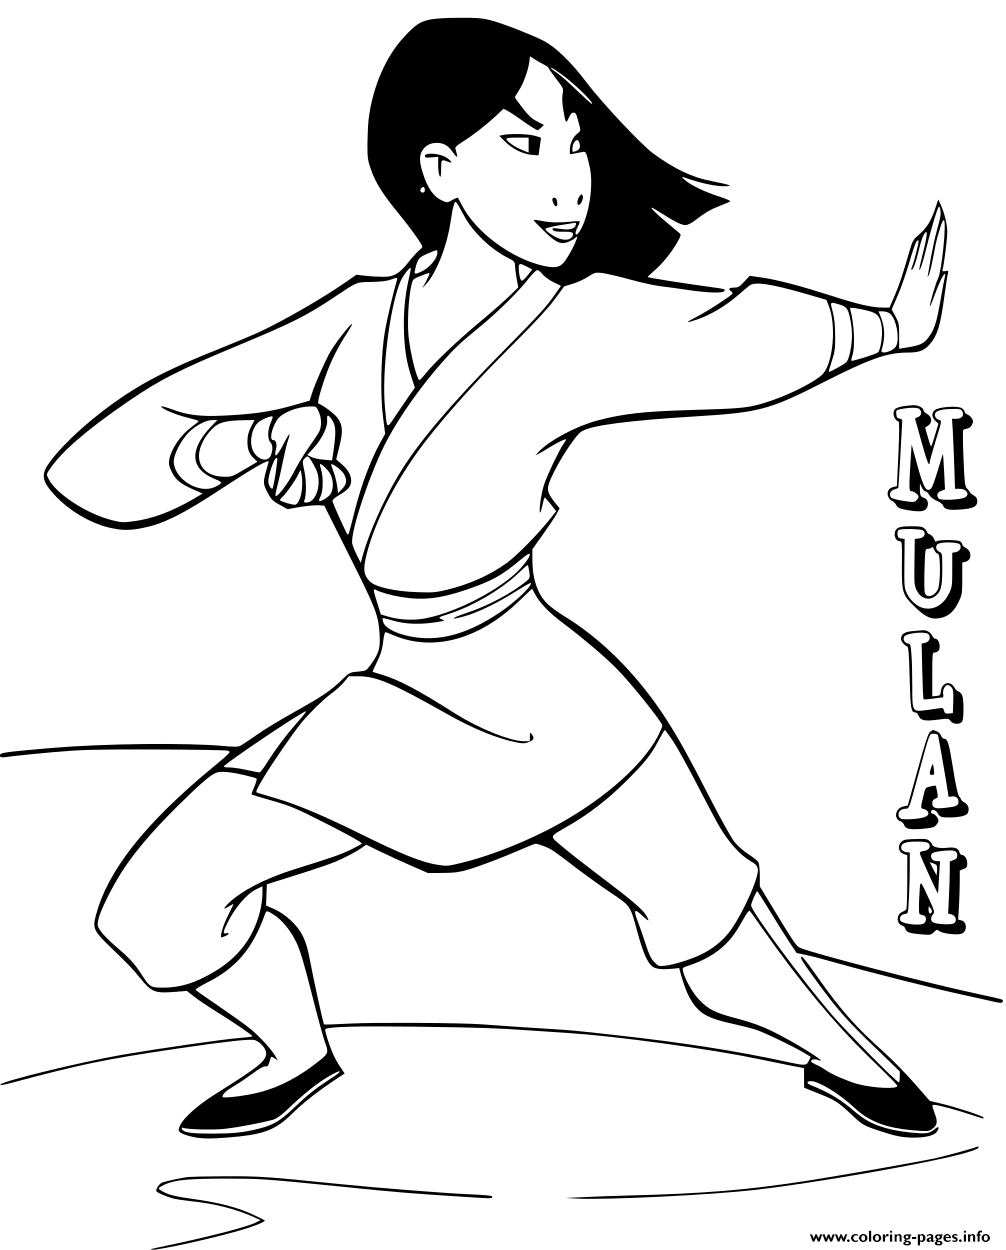 Mulan Training For The War Against The Huns coloring